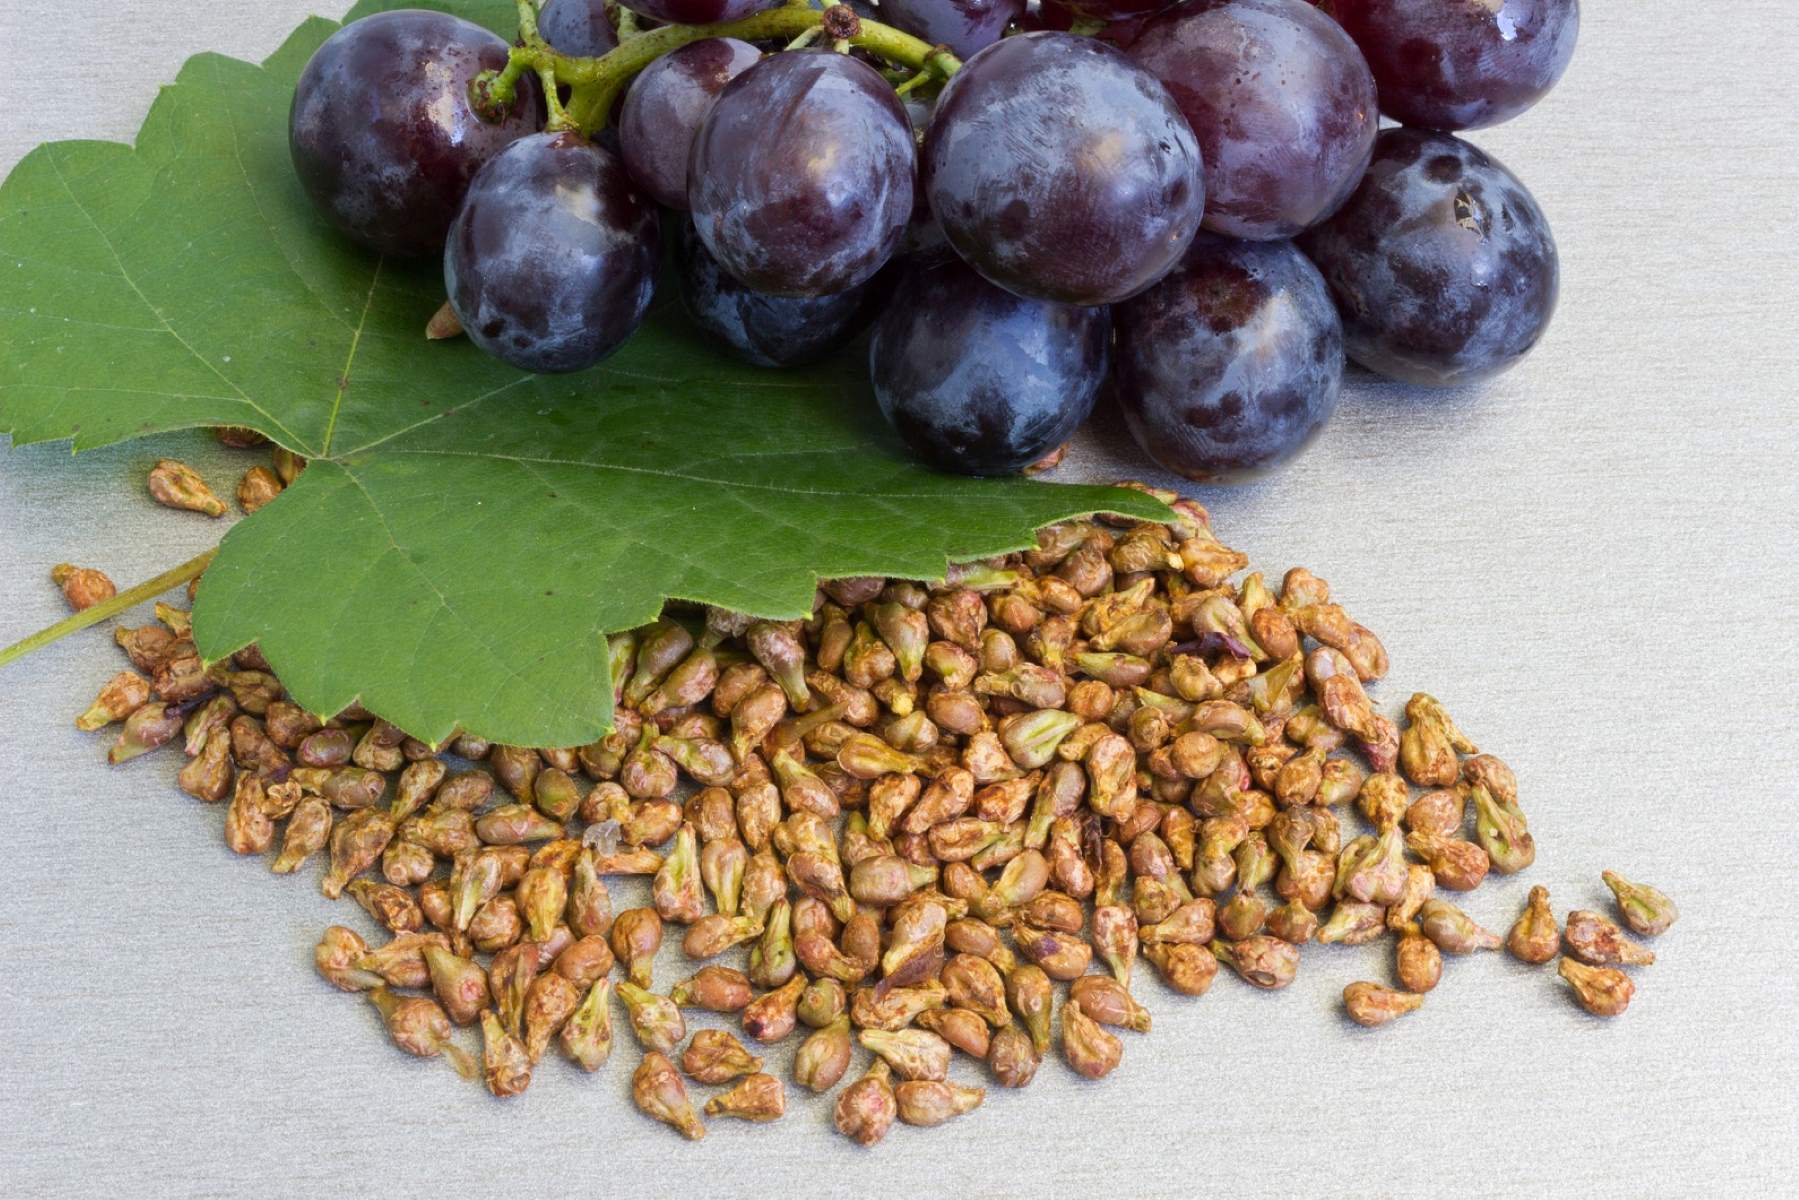 Where Can I Find Grapes With Seeds